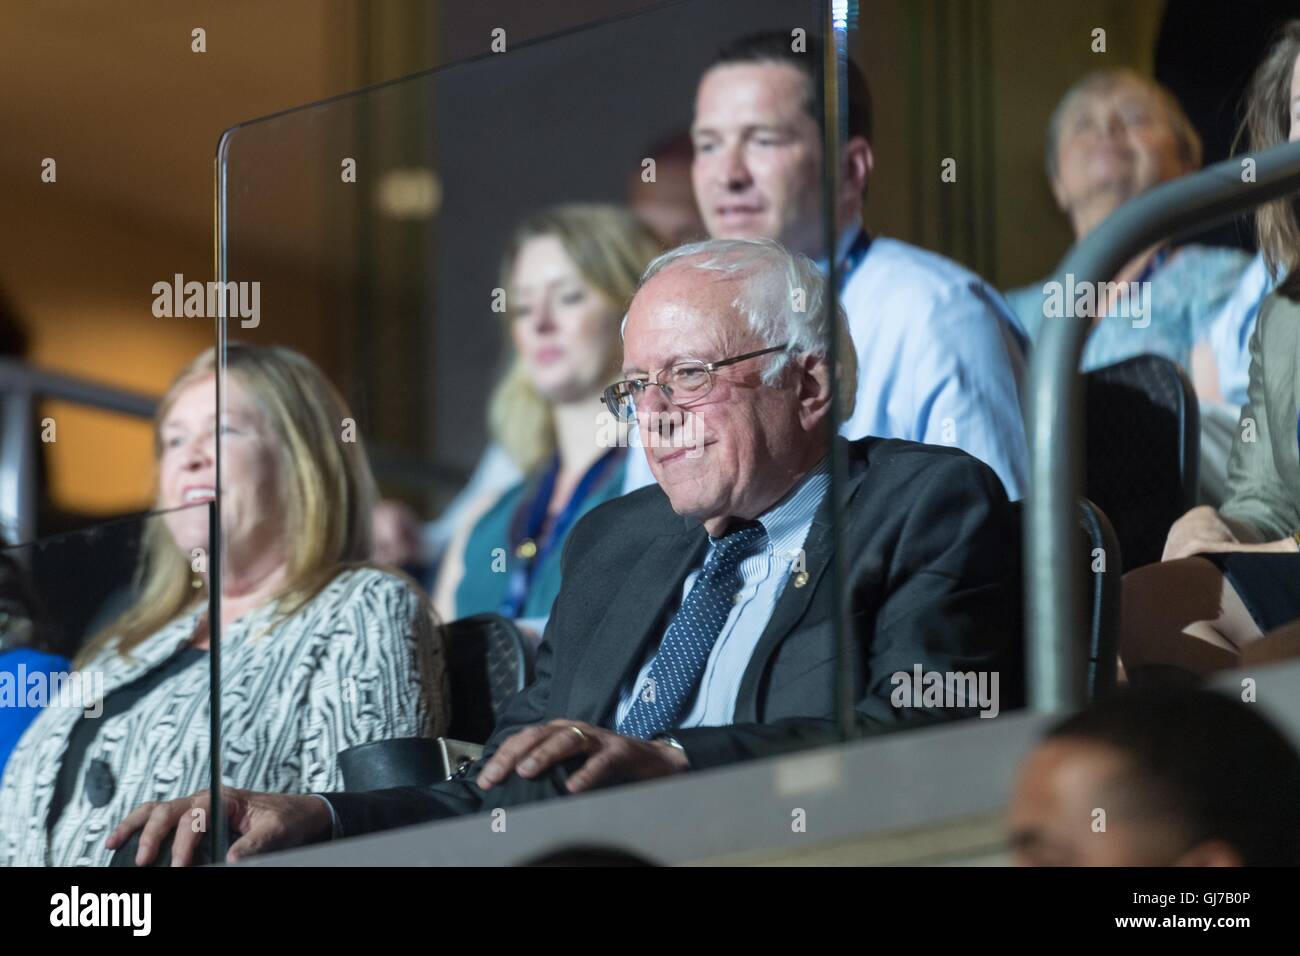 Senator Bernie Sanders watches the roll call vote during the 2nd day of the Democratic National Convention at the Wells Fargo Center July 26, 2016 in Philadelphia, Pennsylvania. Stock Photo